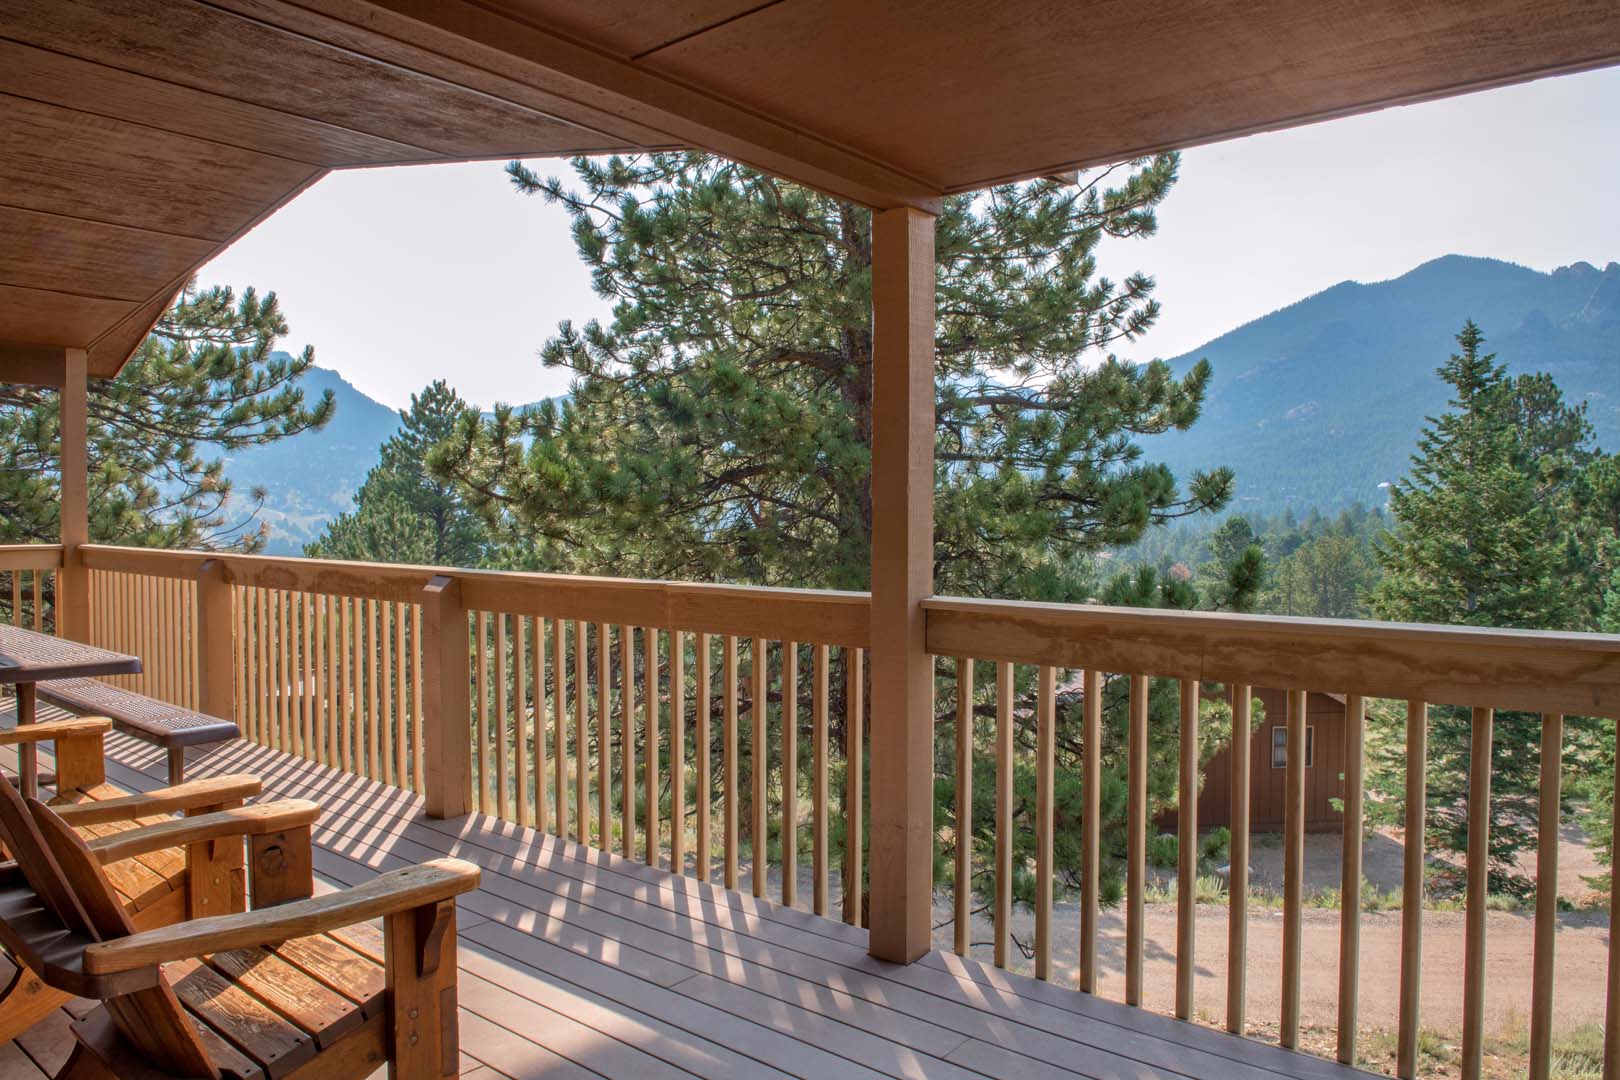 Outdoor patio with chairs overlooking the mountains